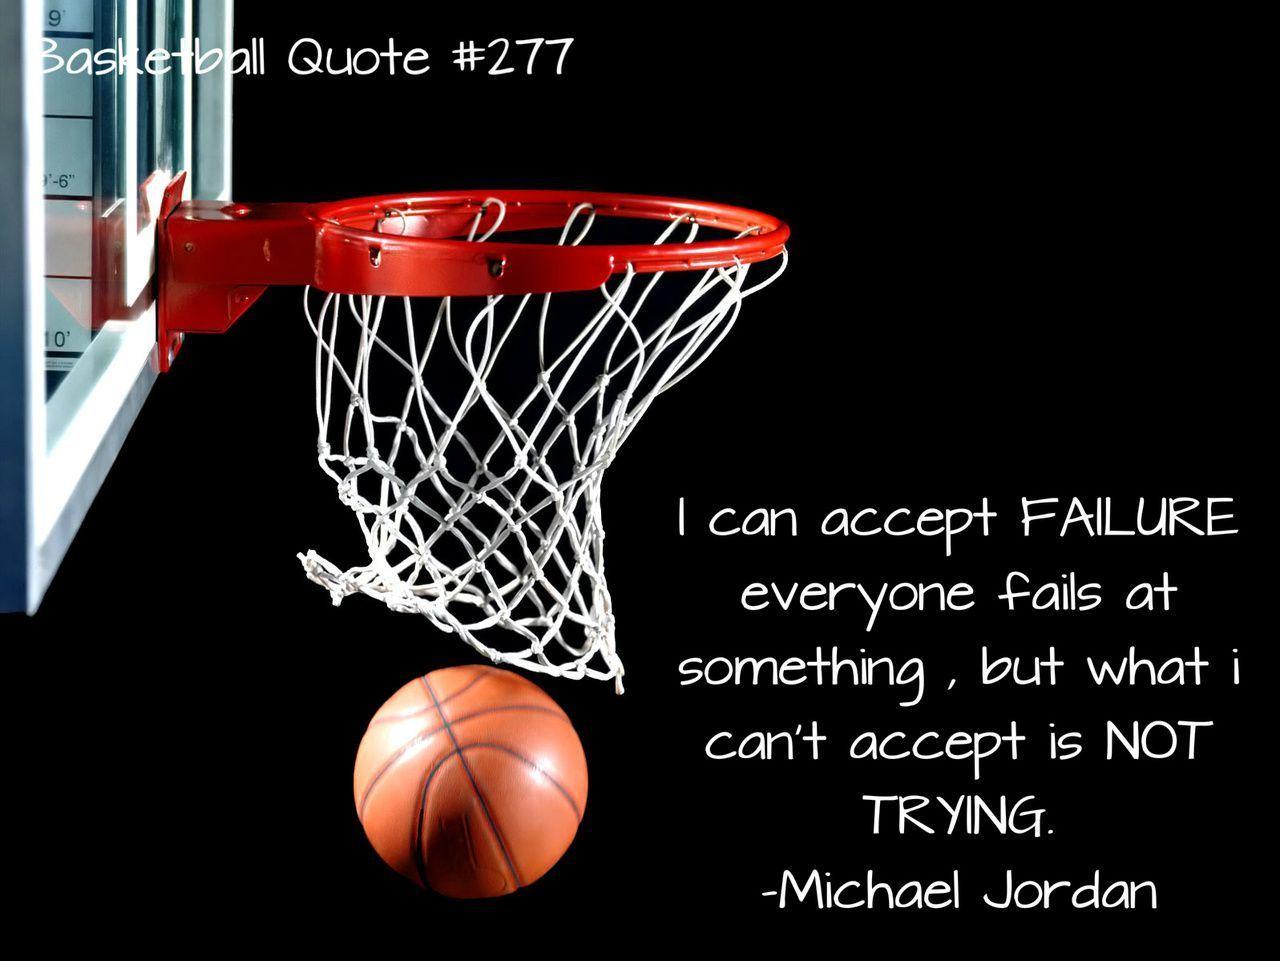 Download Basketball Quotes Wallpaper Wallpaper Download. Basketball quotes, Basketball quotes funny, Basketball quotes inspirational